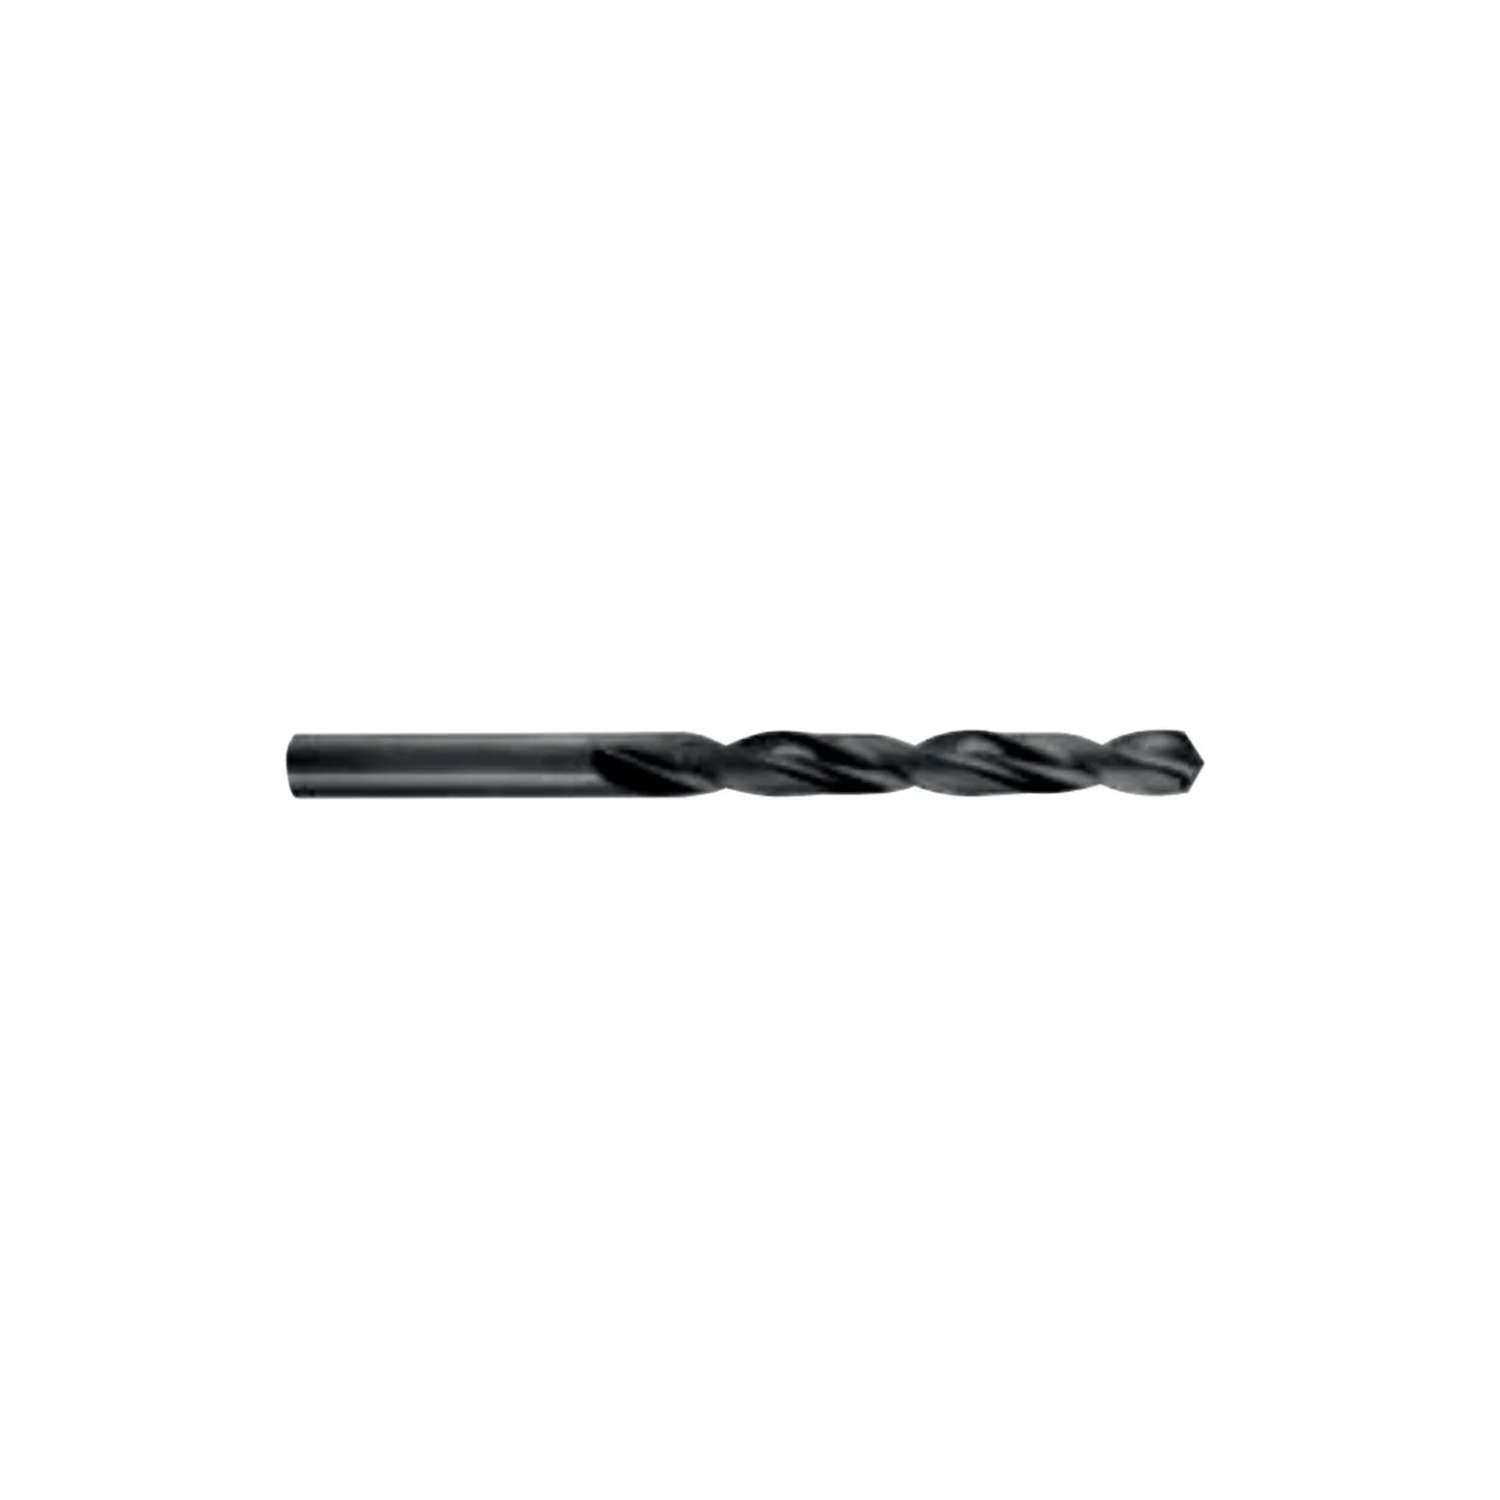 Cylindrical tip for general applications DIN 338 type N,  (1,65-3,05) - ILIX